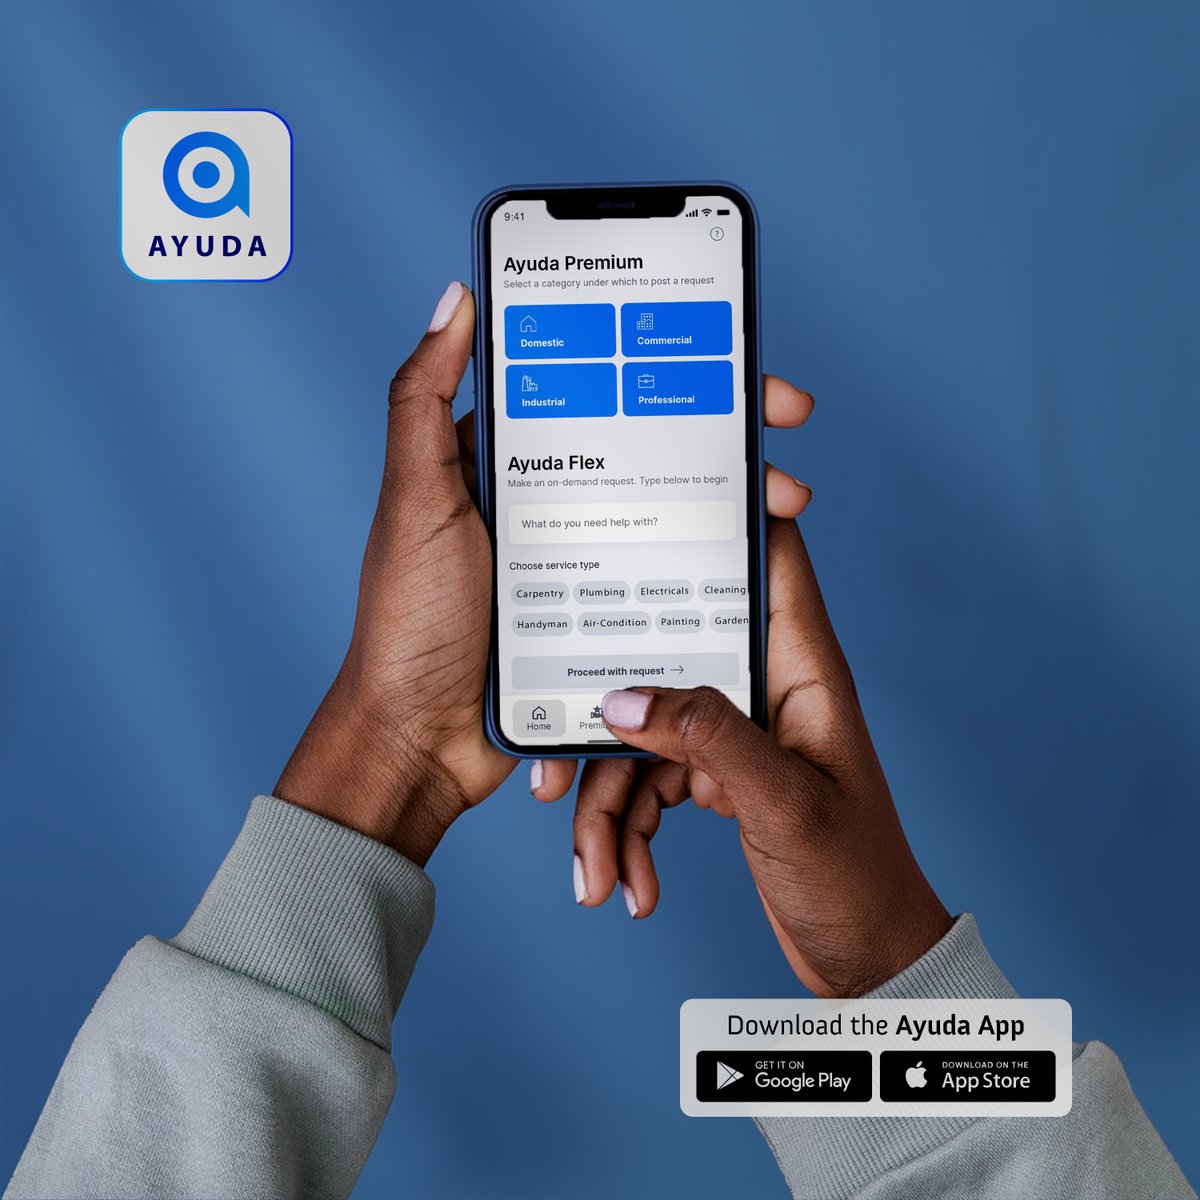 Need help with facilities maintenance? The Ayuda App has got you covered! From routine cleaning to emergency repairs, our team is just a click away. Download the app and experience hassle-free facilities management. #AyudaApp #FacilitiesMaintenance 

🔗 onelink.to/ayuda